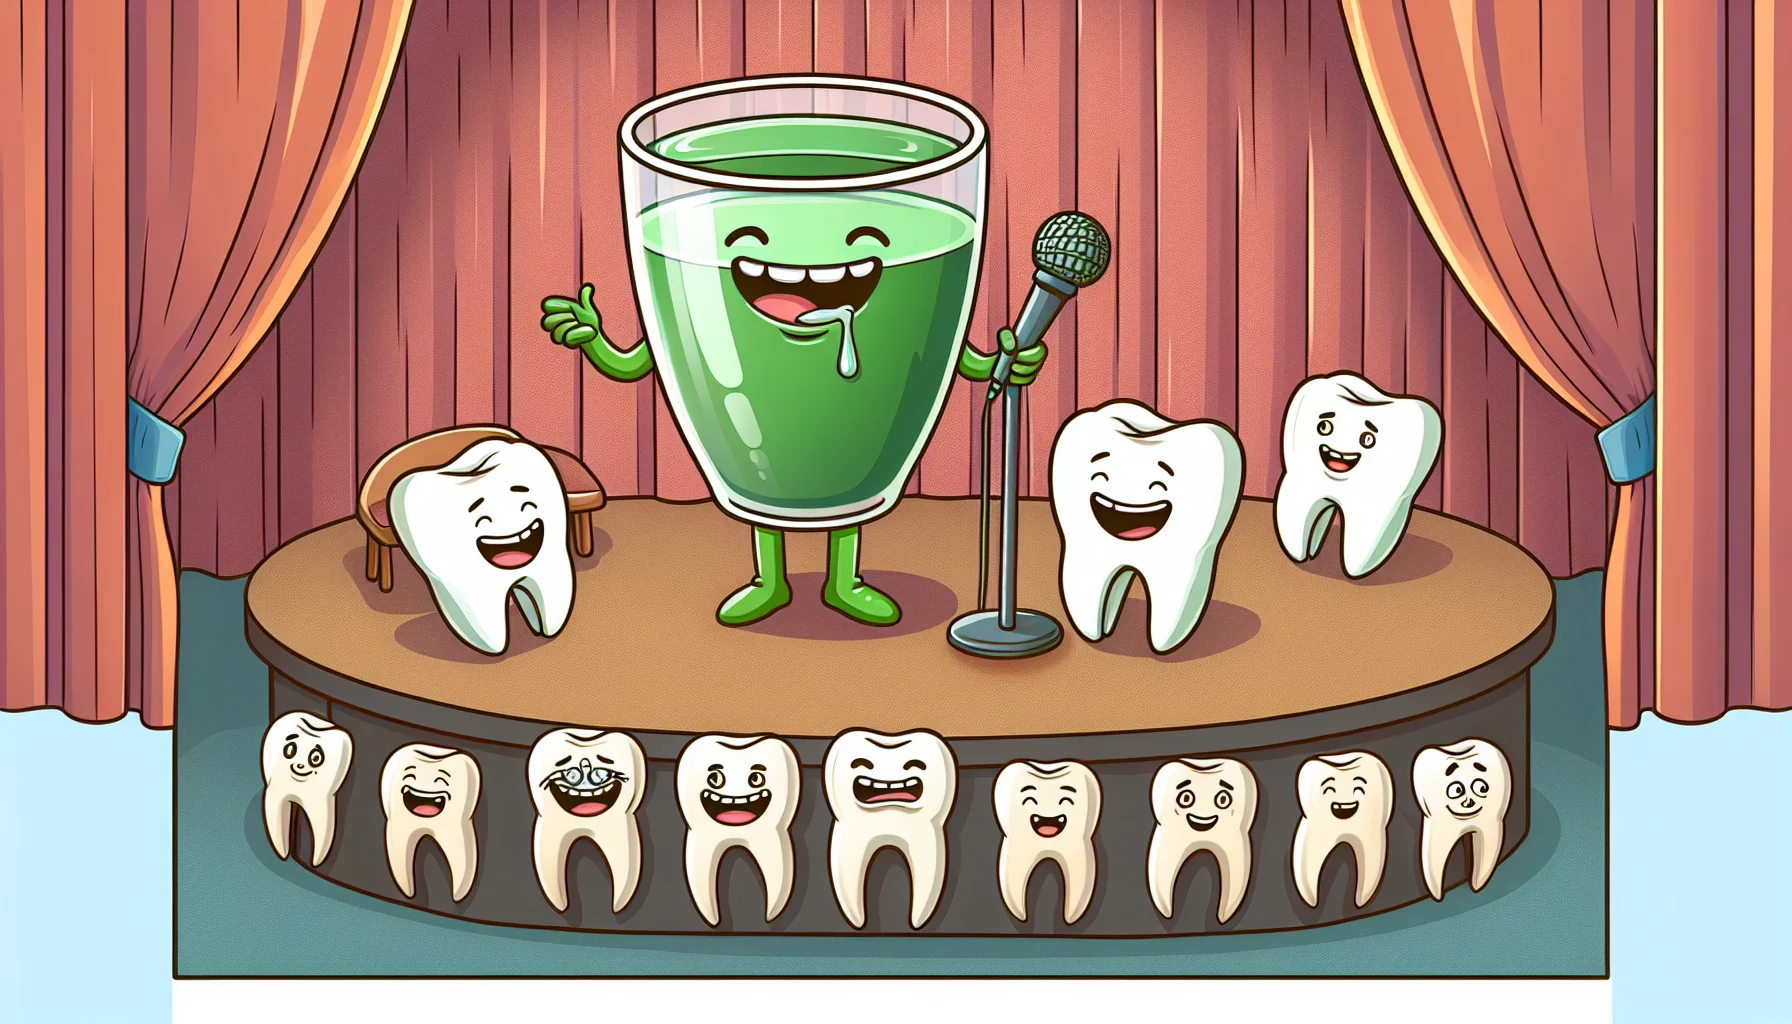 Illustrate a humorous scene where a cup of green tea is standing on a stand-up comedy stage, microphone in hand, telling jokes to an audience of human teeth of various descents. Some of the teeth are showing slight green tint of stains, but they all have cheerful expressions. This scene should be light-hearted and playful, subtly promoting the enjoyment of green tea despite its potential to lightly stain teeth.